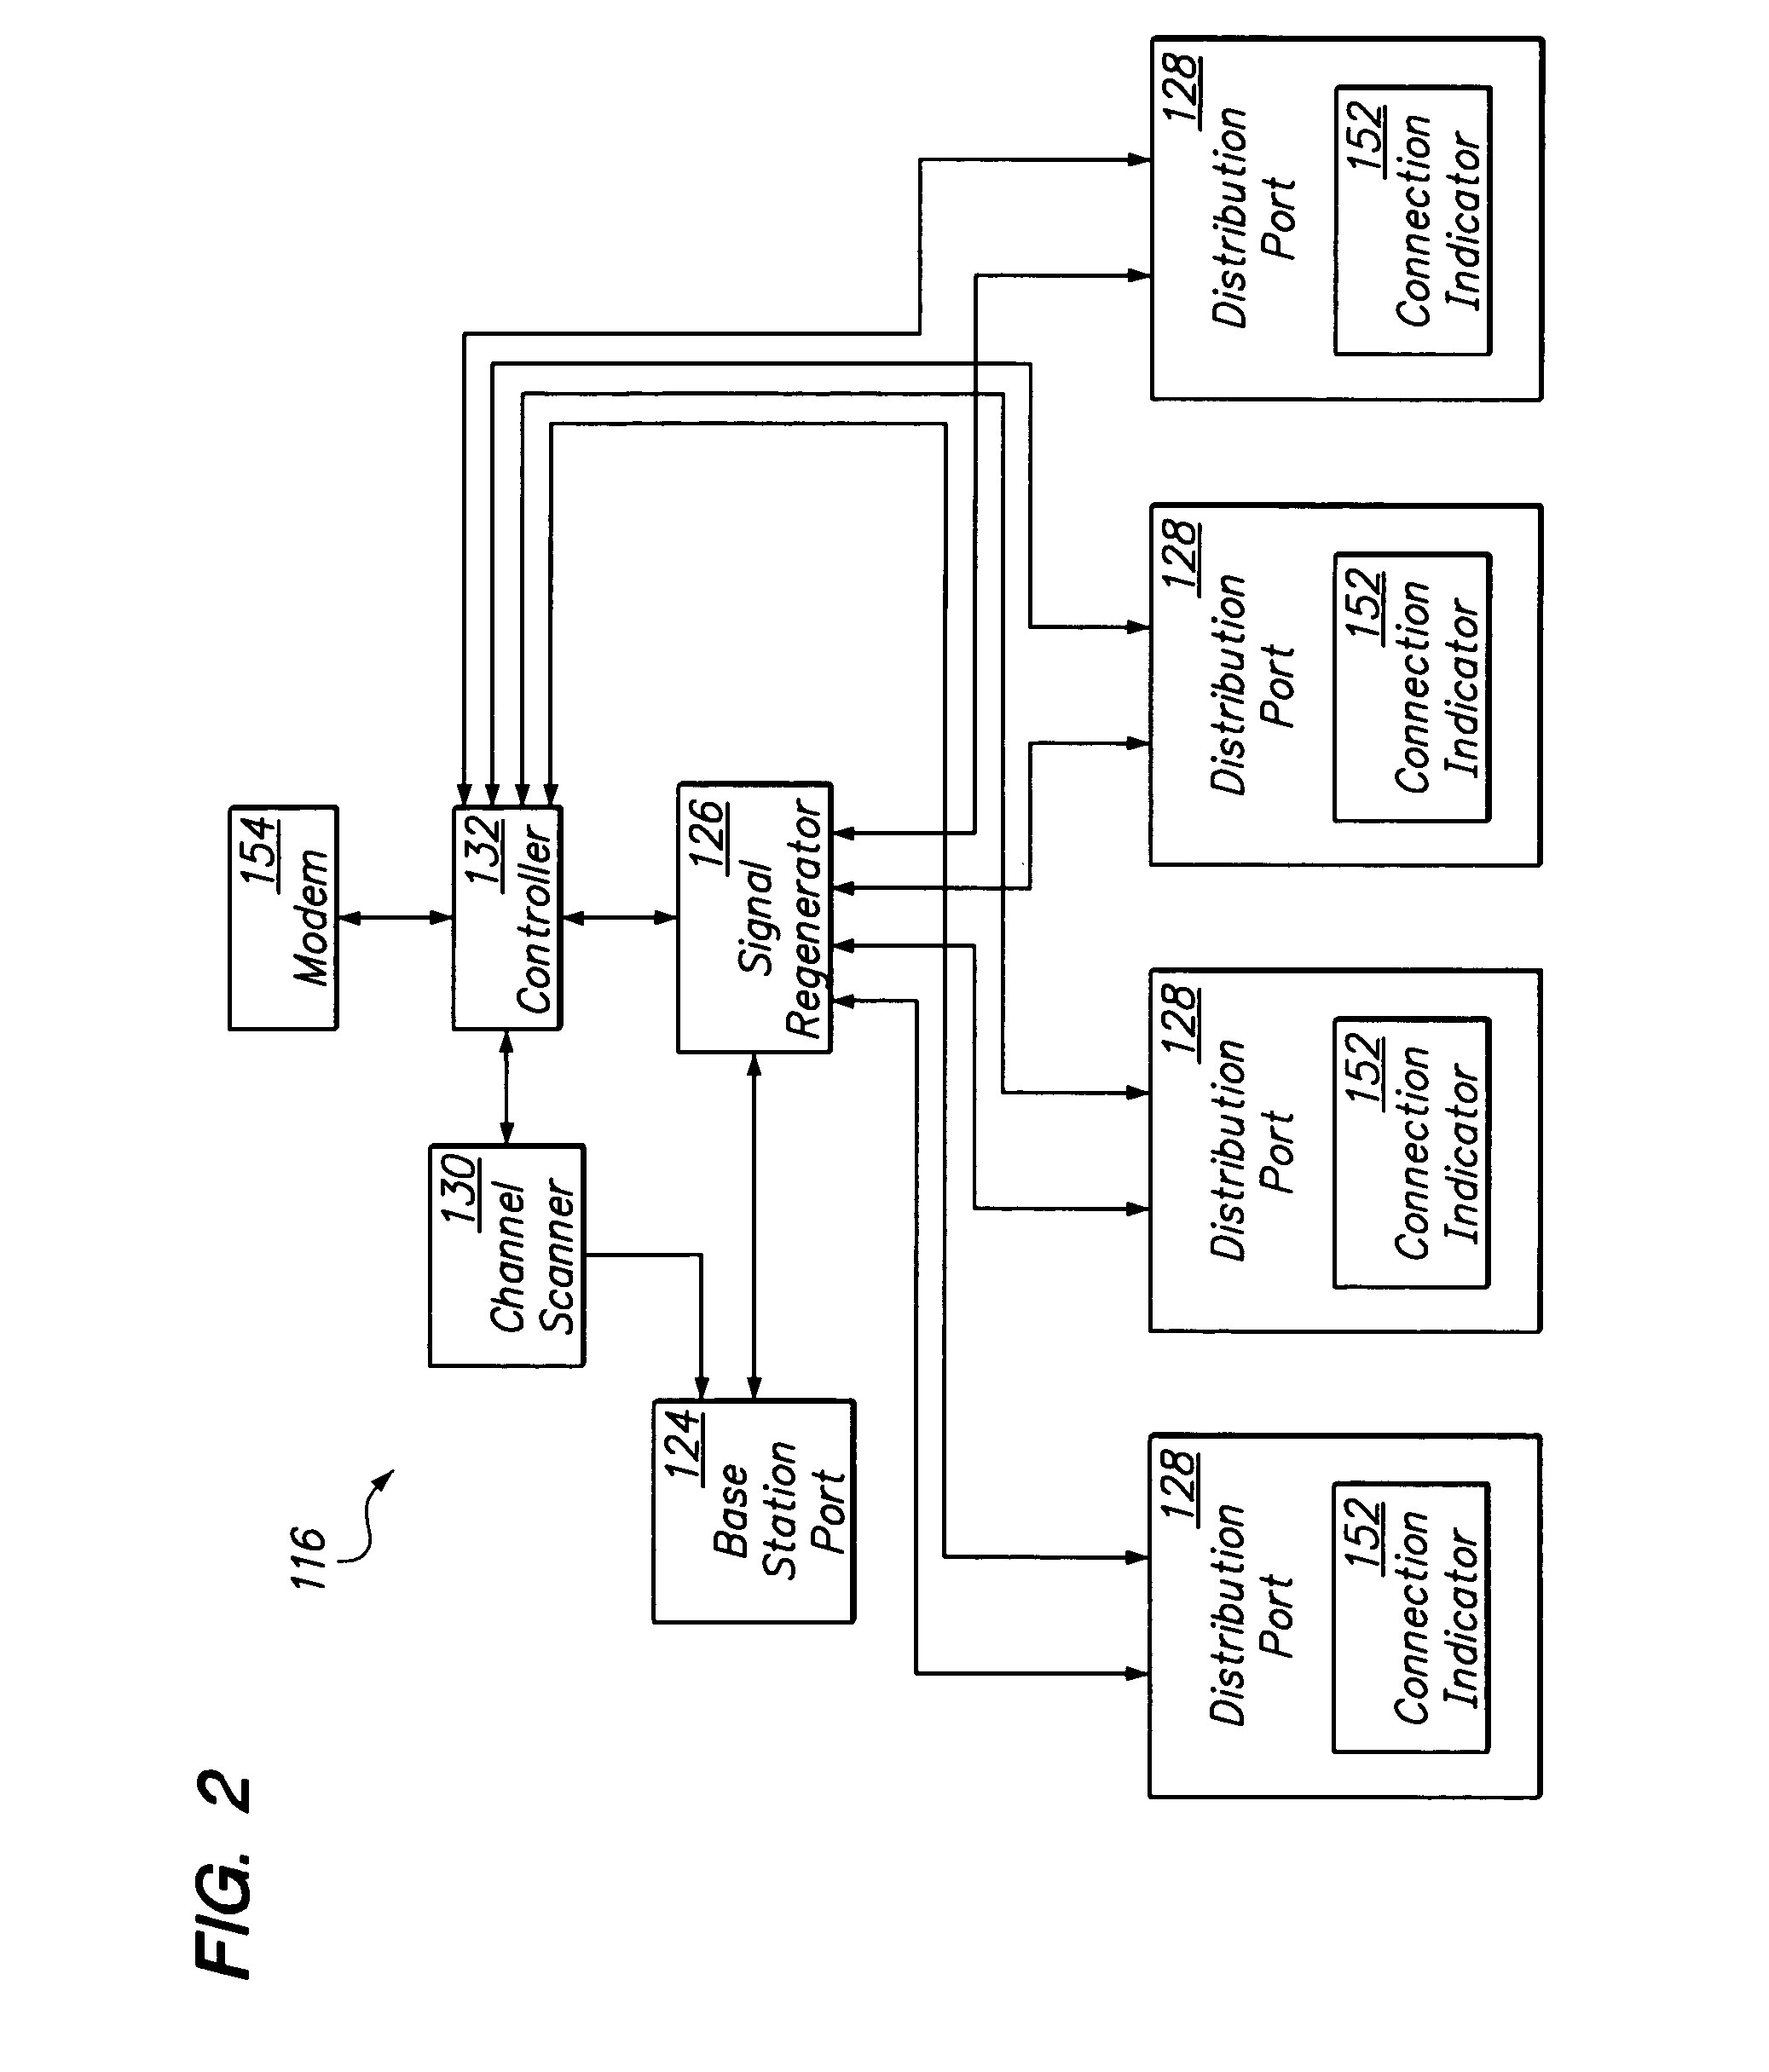 Distributed antenna communications system and methods of implementing thereof